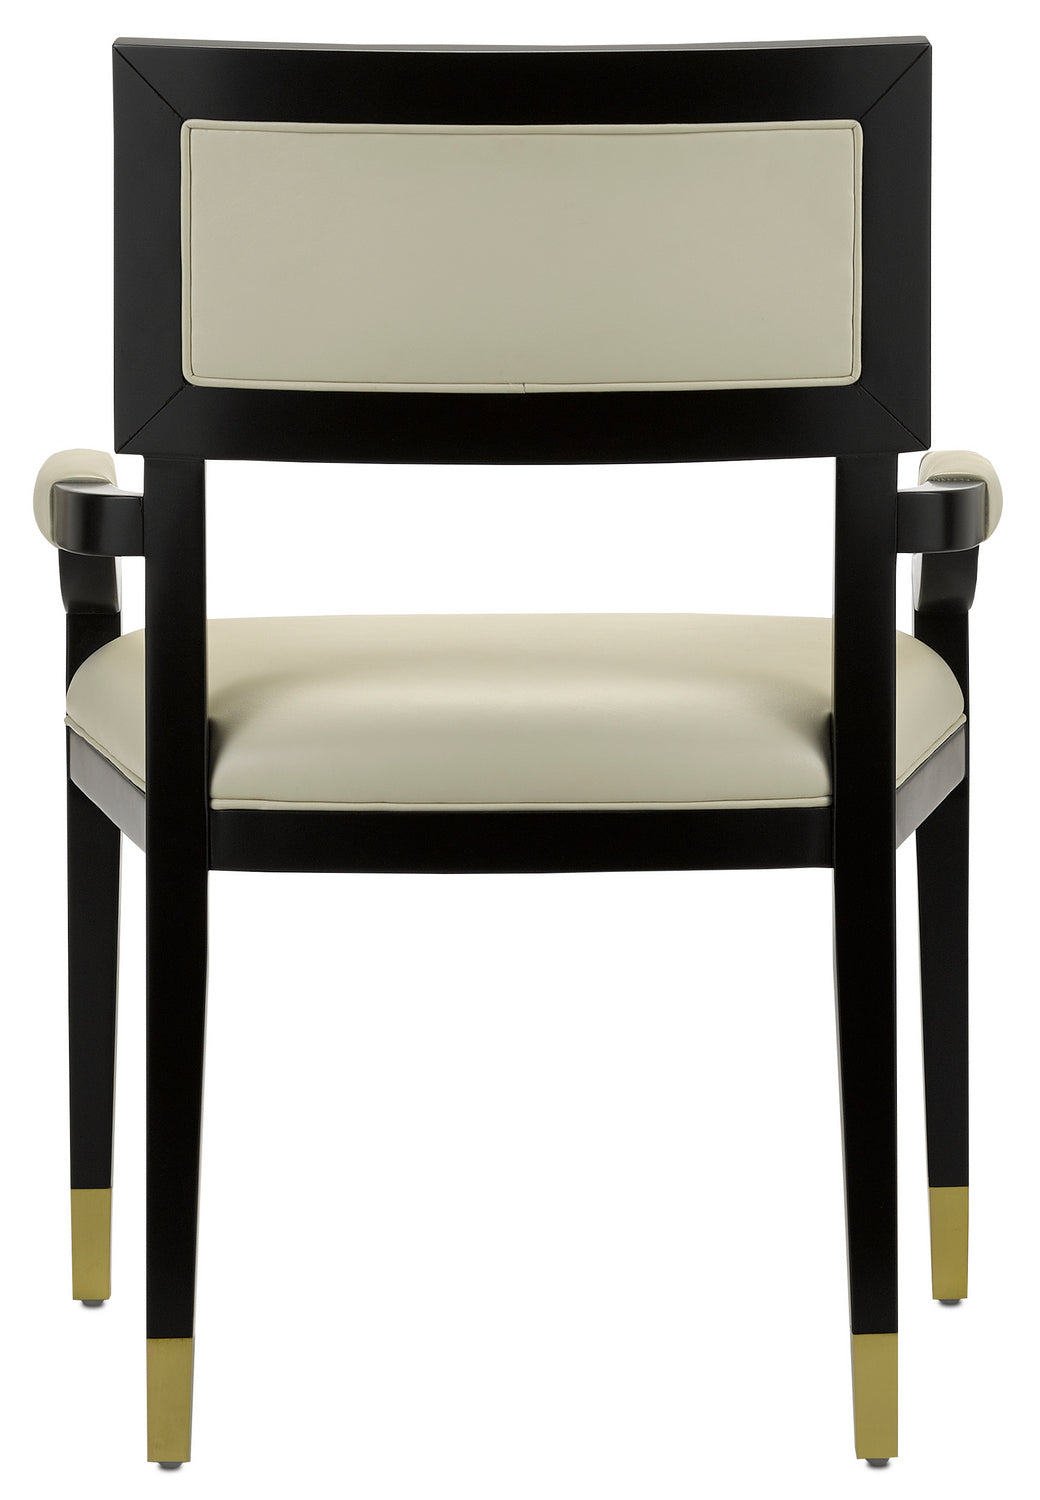 Chair from the Barry Goralnick collection in Caviar Black/Brushed Brass/Milk finish